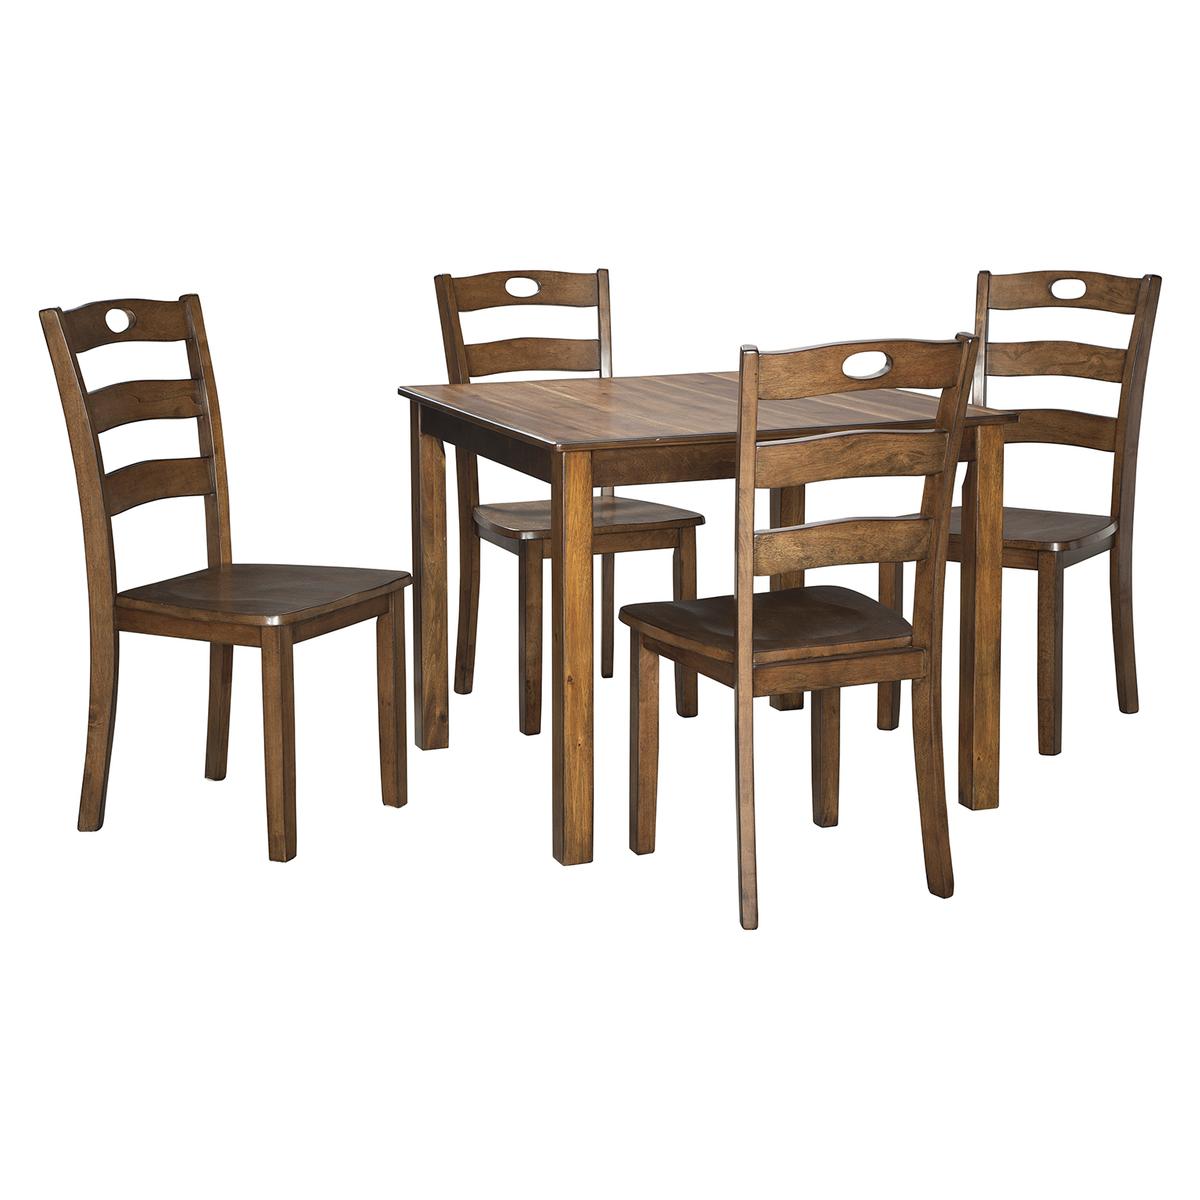 Ashley Hazelteen Dining Table & 4 Chairs (5 Piece Set)